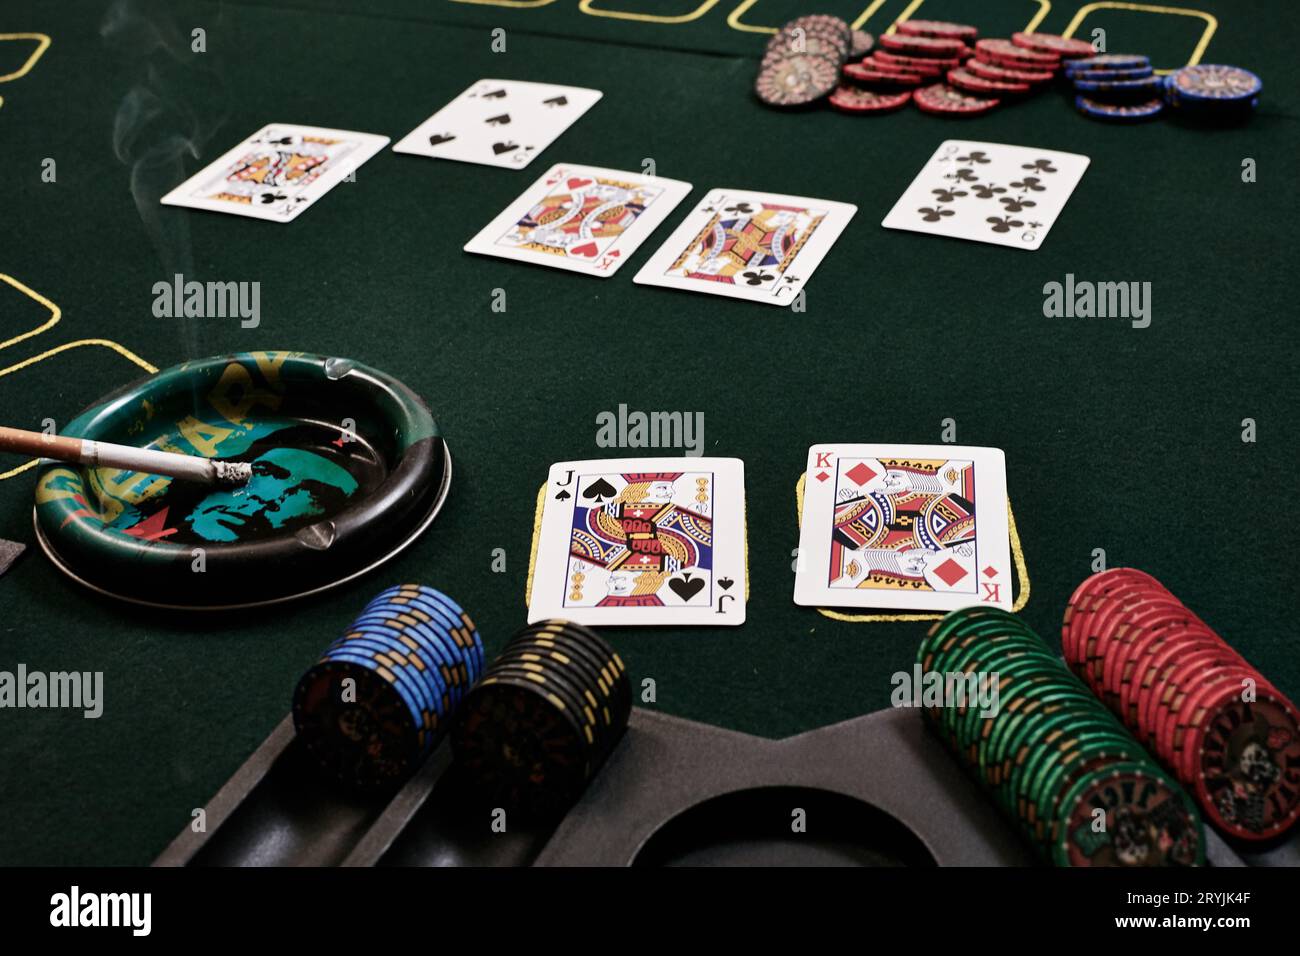 Playing poker and winning the pot with a full house Stock Photo